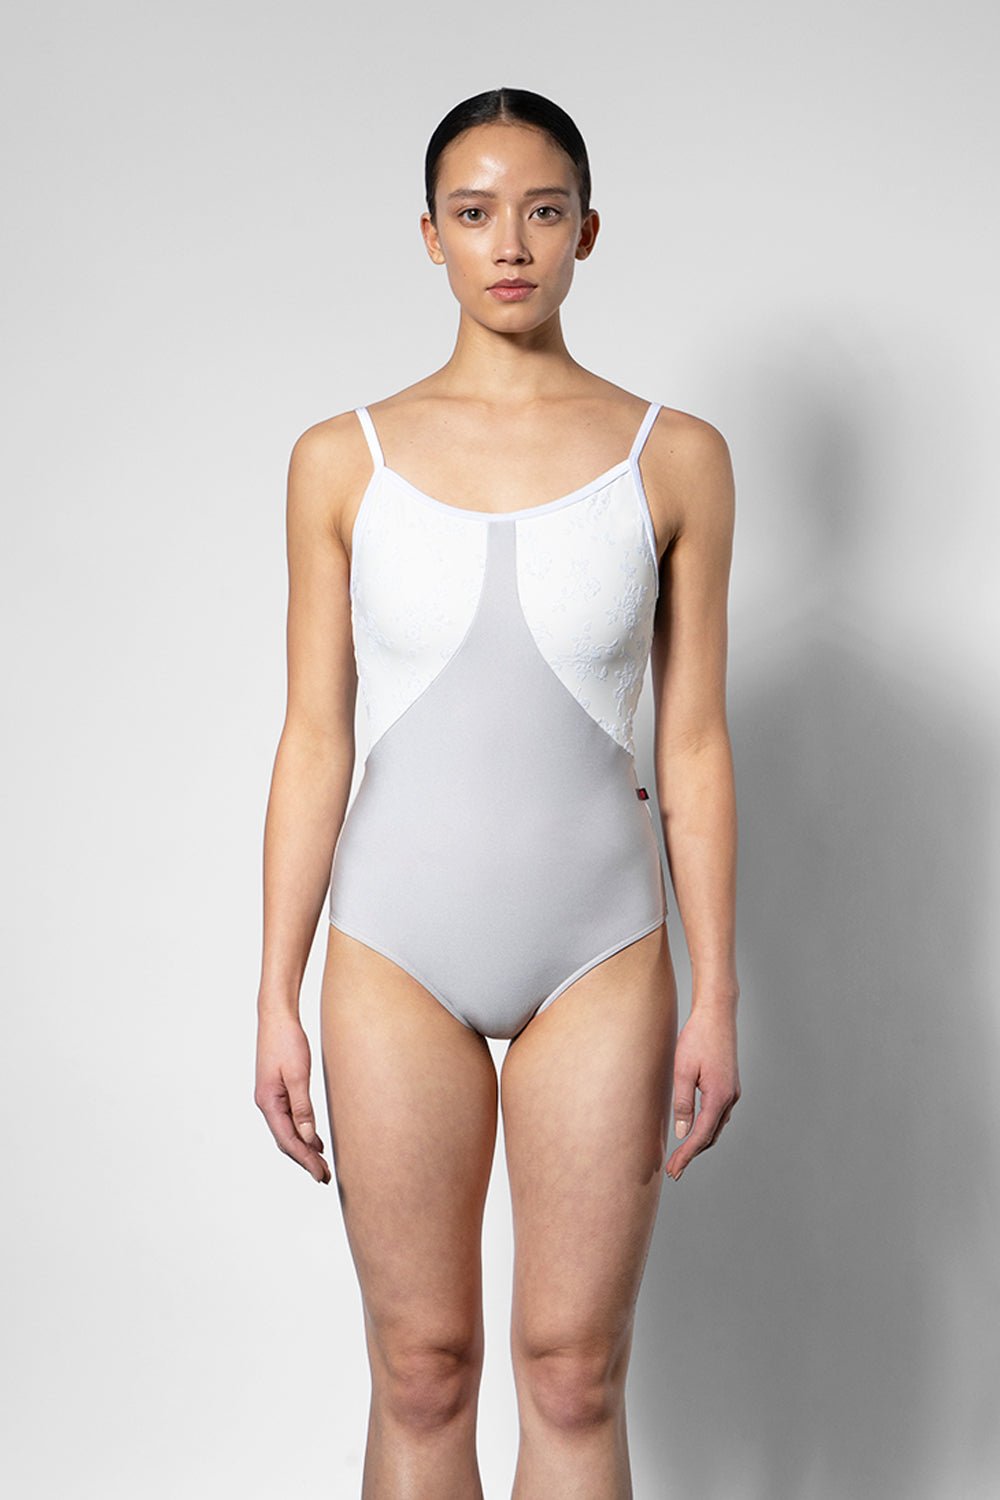 Amanda Black Label leotard in N-Silver body color with Sparkling Ivory top and V-White trim color